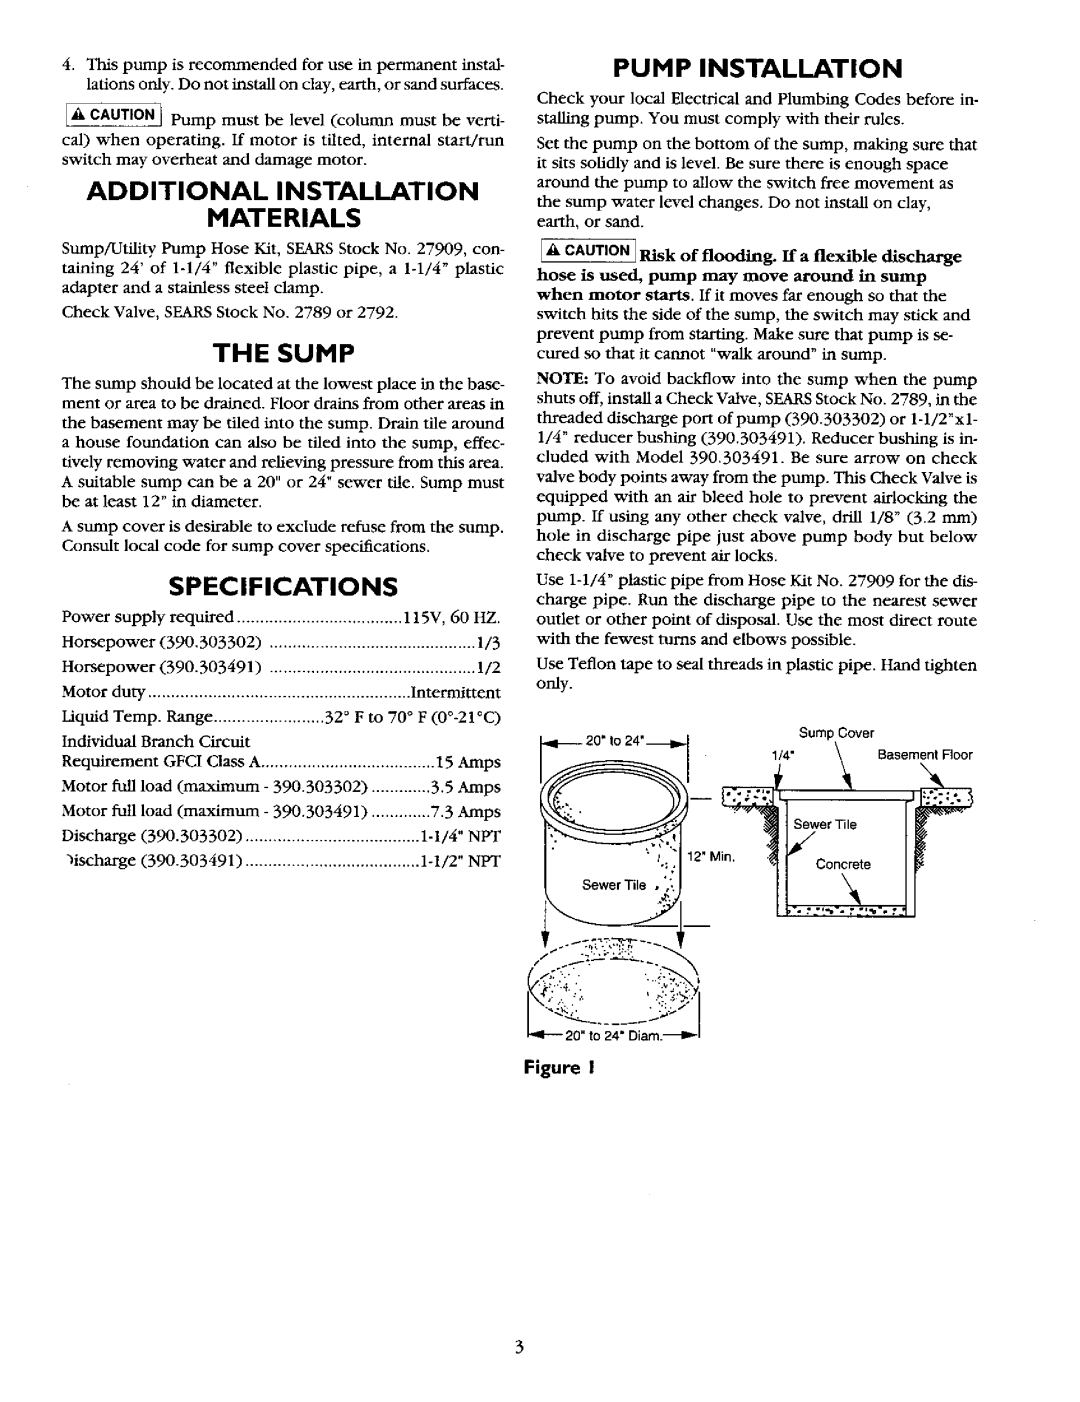 Sears 390.303302, 390.303491 Additional Installation Materials, The Sump, Specifications, Pump Installation, + g 